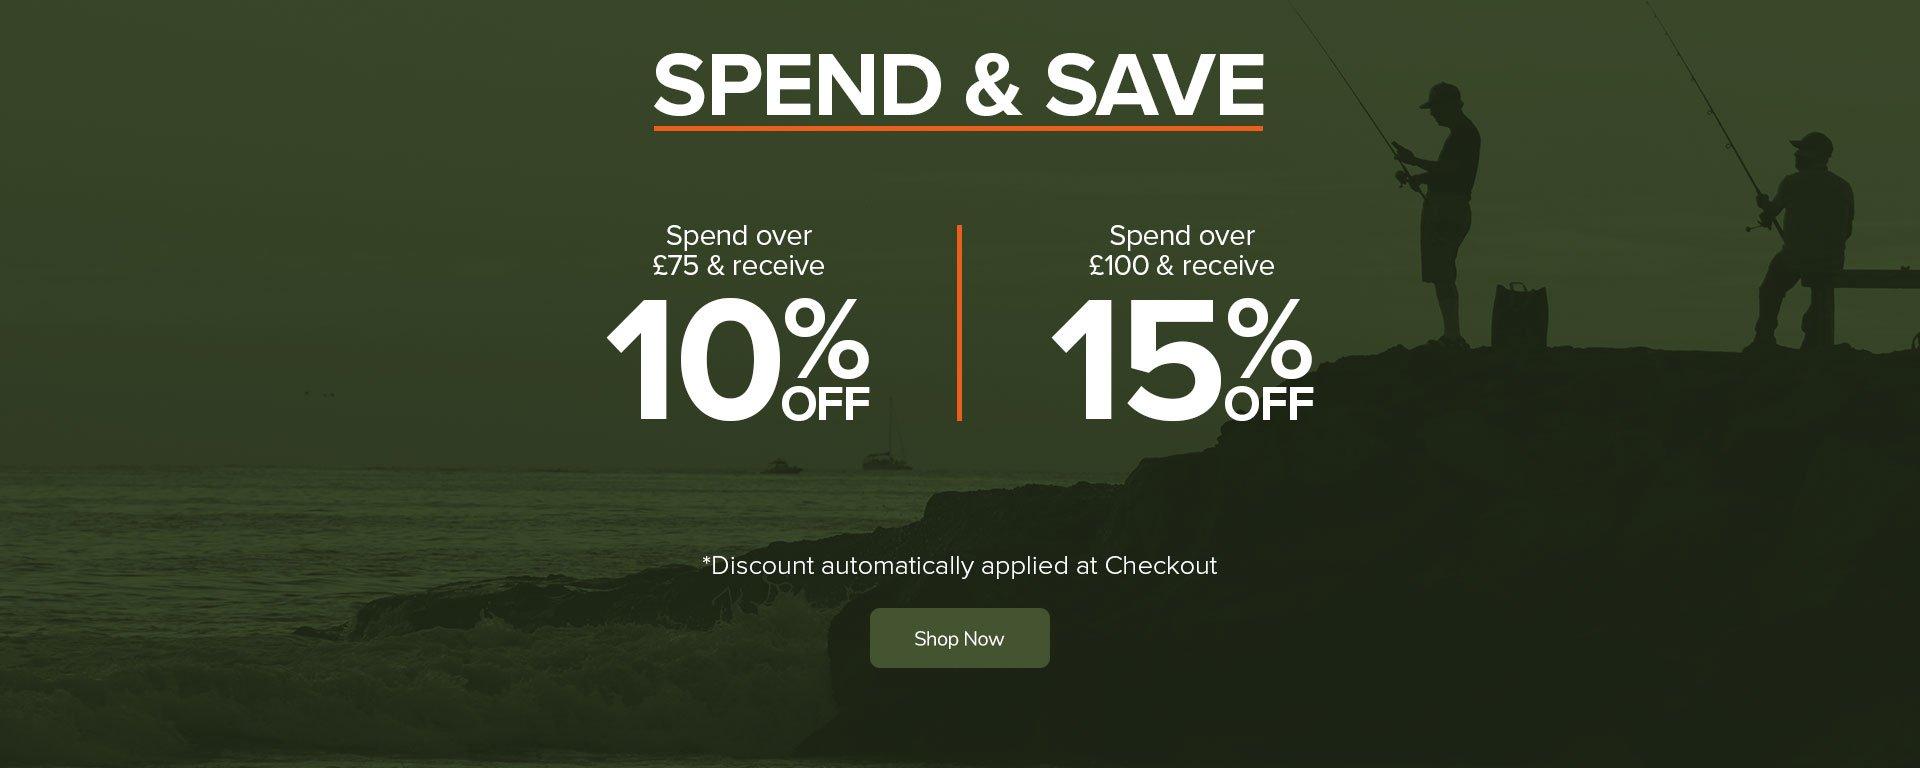 Spend Save - Up To 15% OFF